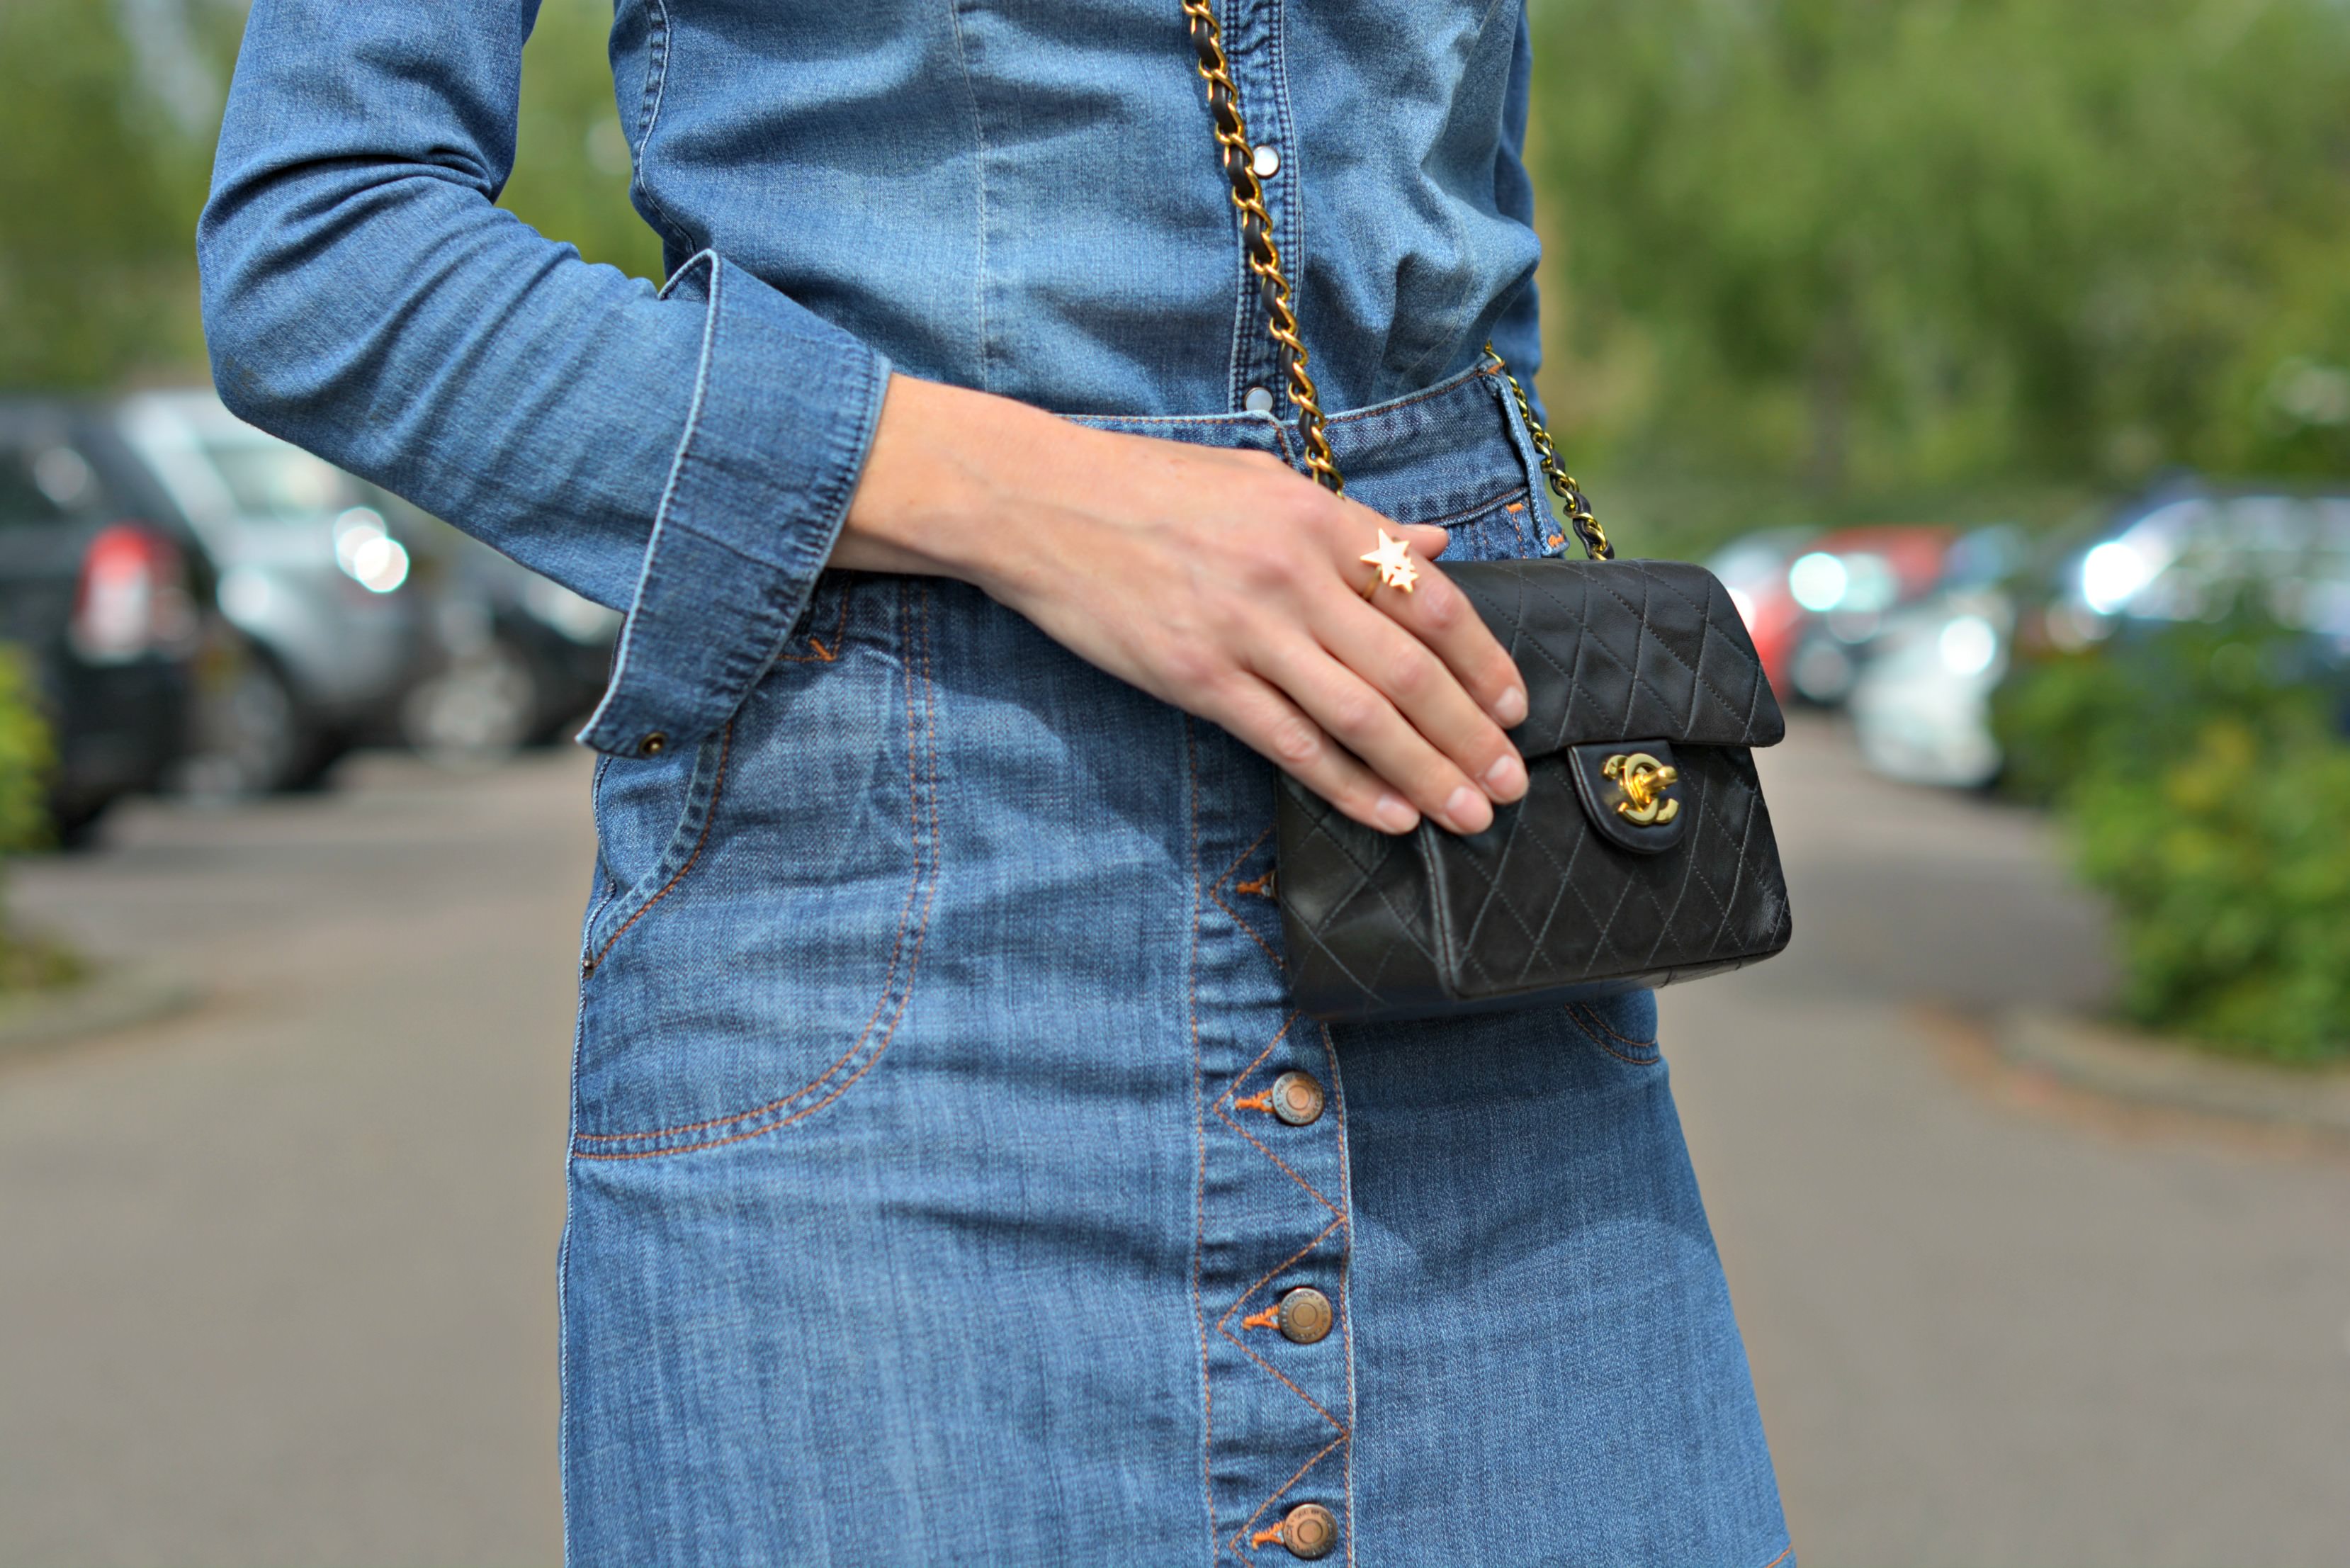 Double denim another way|Chanel 2.55 mini|Lizzy O gold star ring